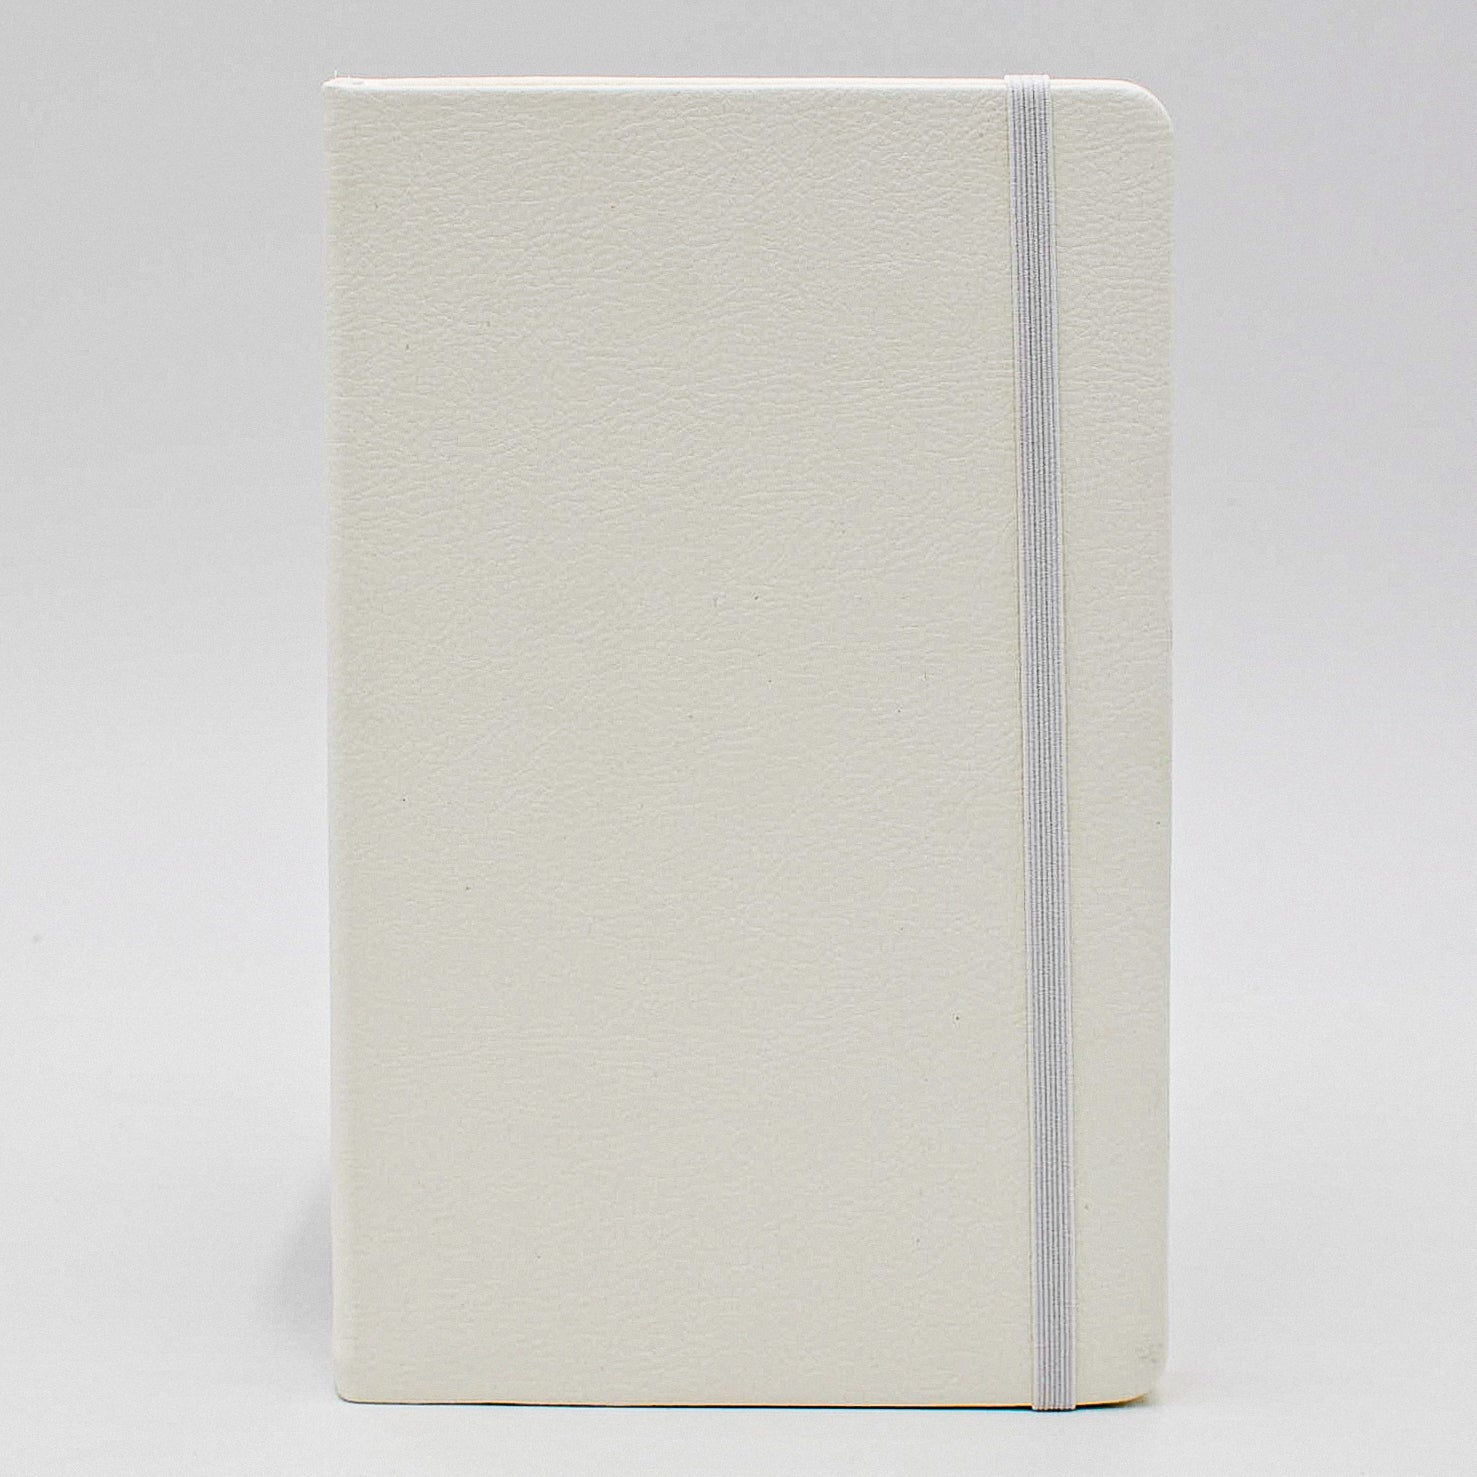 Journal: Faux Leather Lined Case Bound Book with Elastic Closure  This vegan leather ruled journal is perfect for your travels, home, car, or office. With a convenient elastic band closure, keep your book closed with ease. With ivory ruled pages, keep easy notes throughout your day.  Available in Tan, White, and Blue  Dimensions: 5" x 8"  white creme cream 5 x  8 5x8